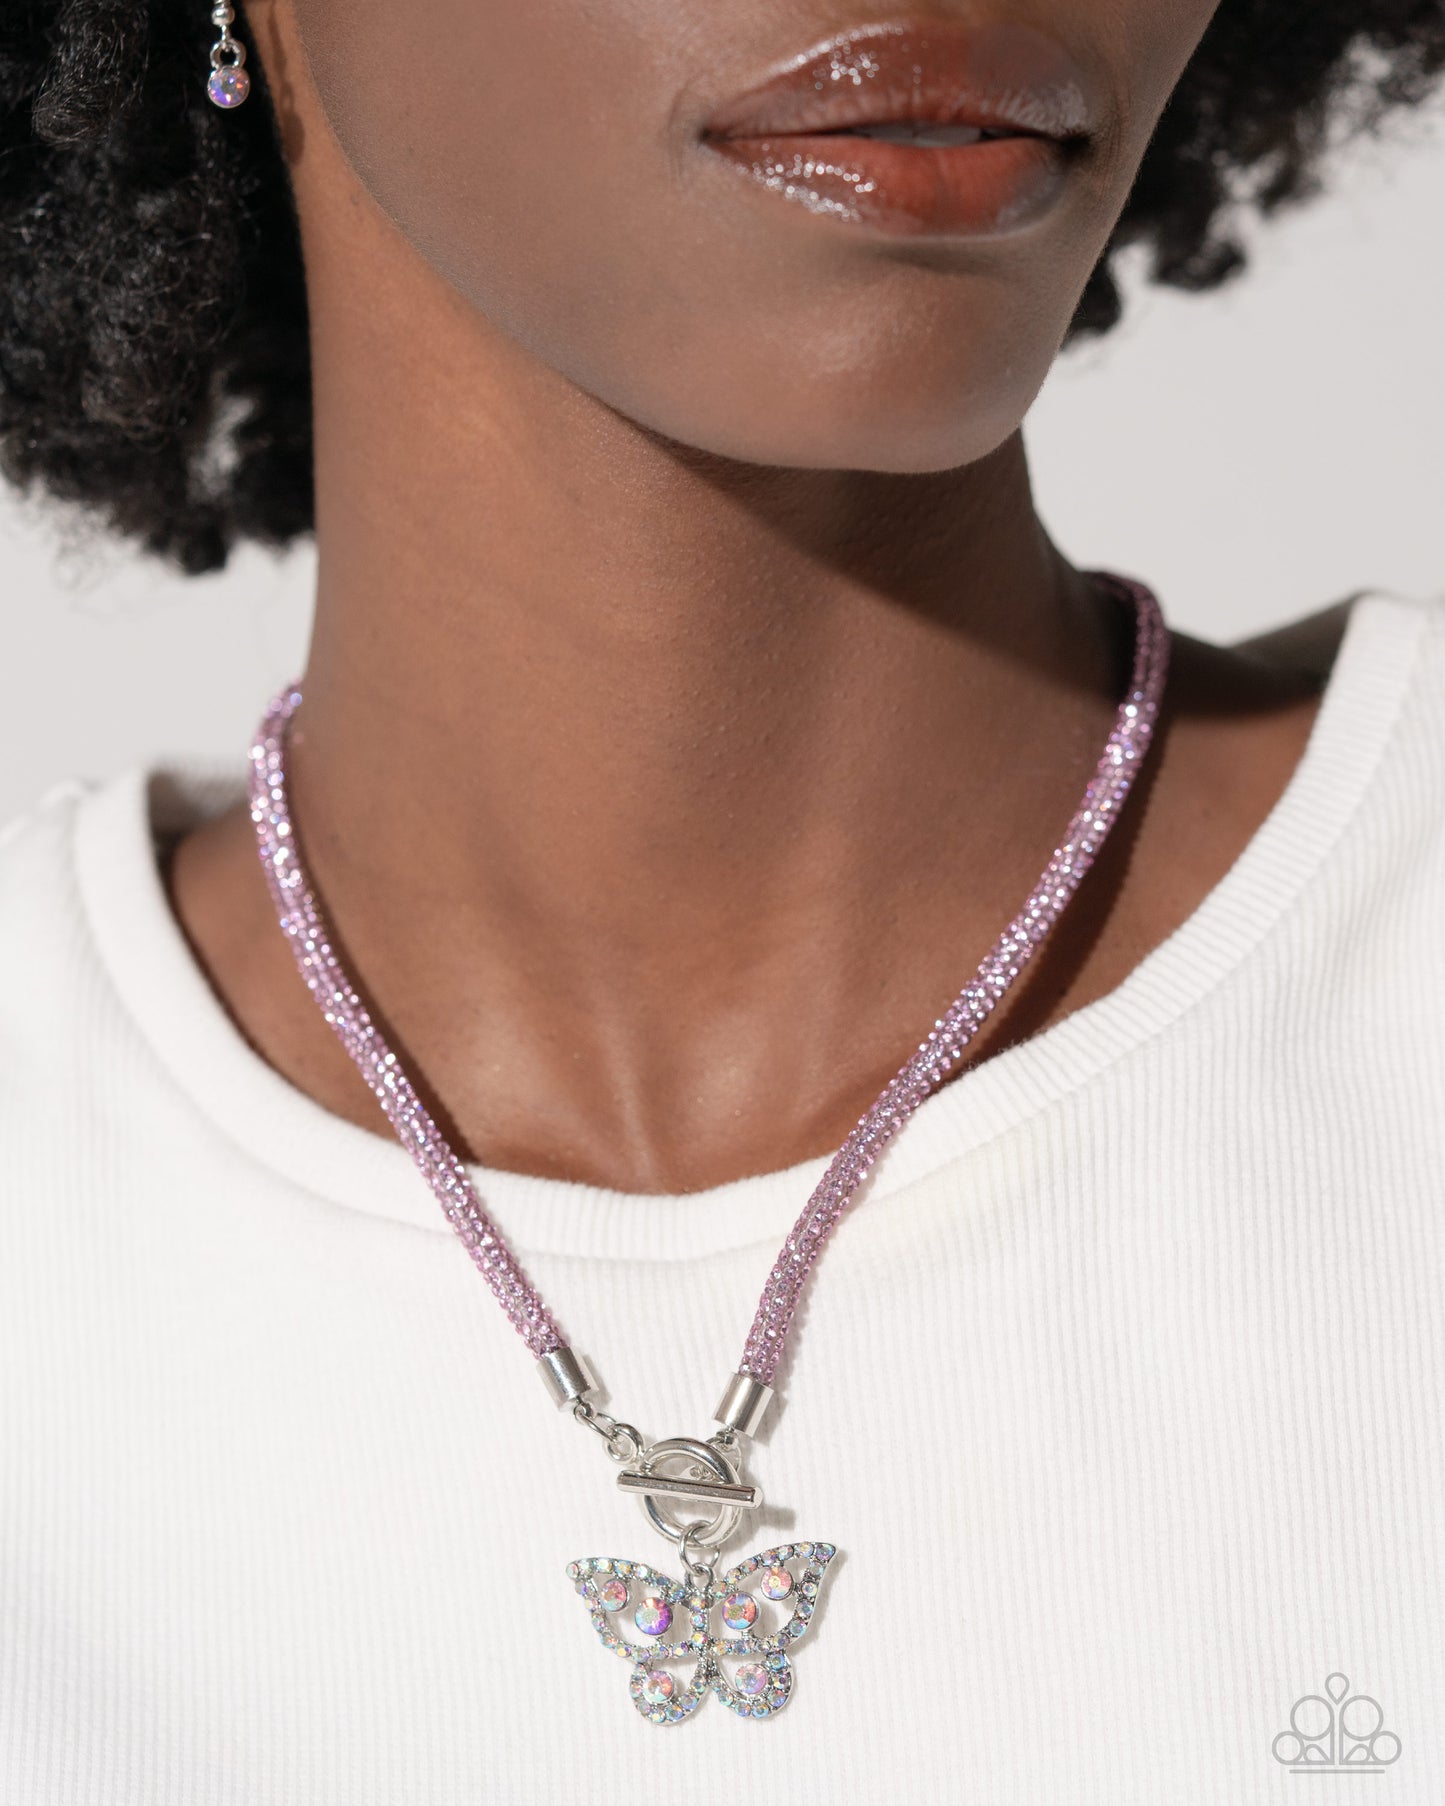 On SHIMMERING Wings Pink Necklace Paparazzi